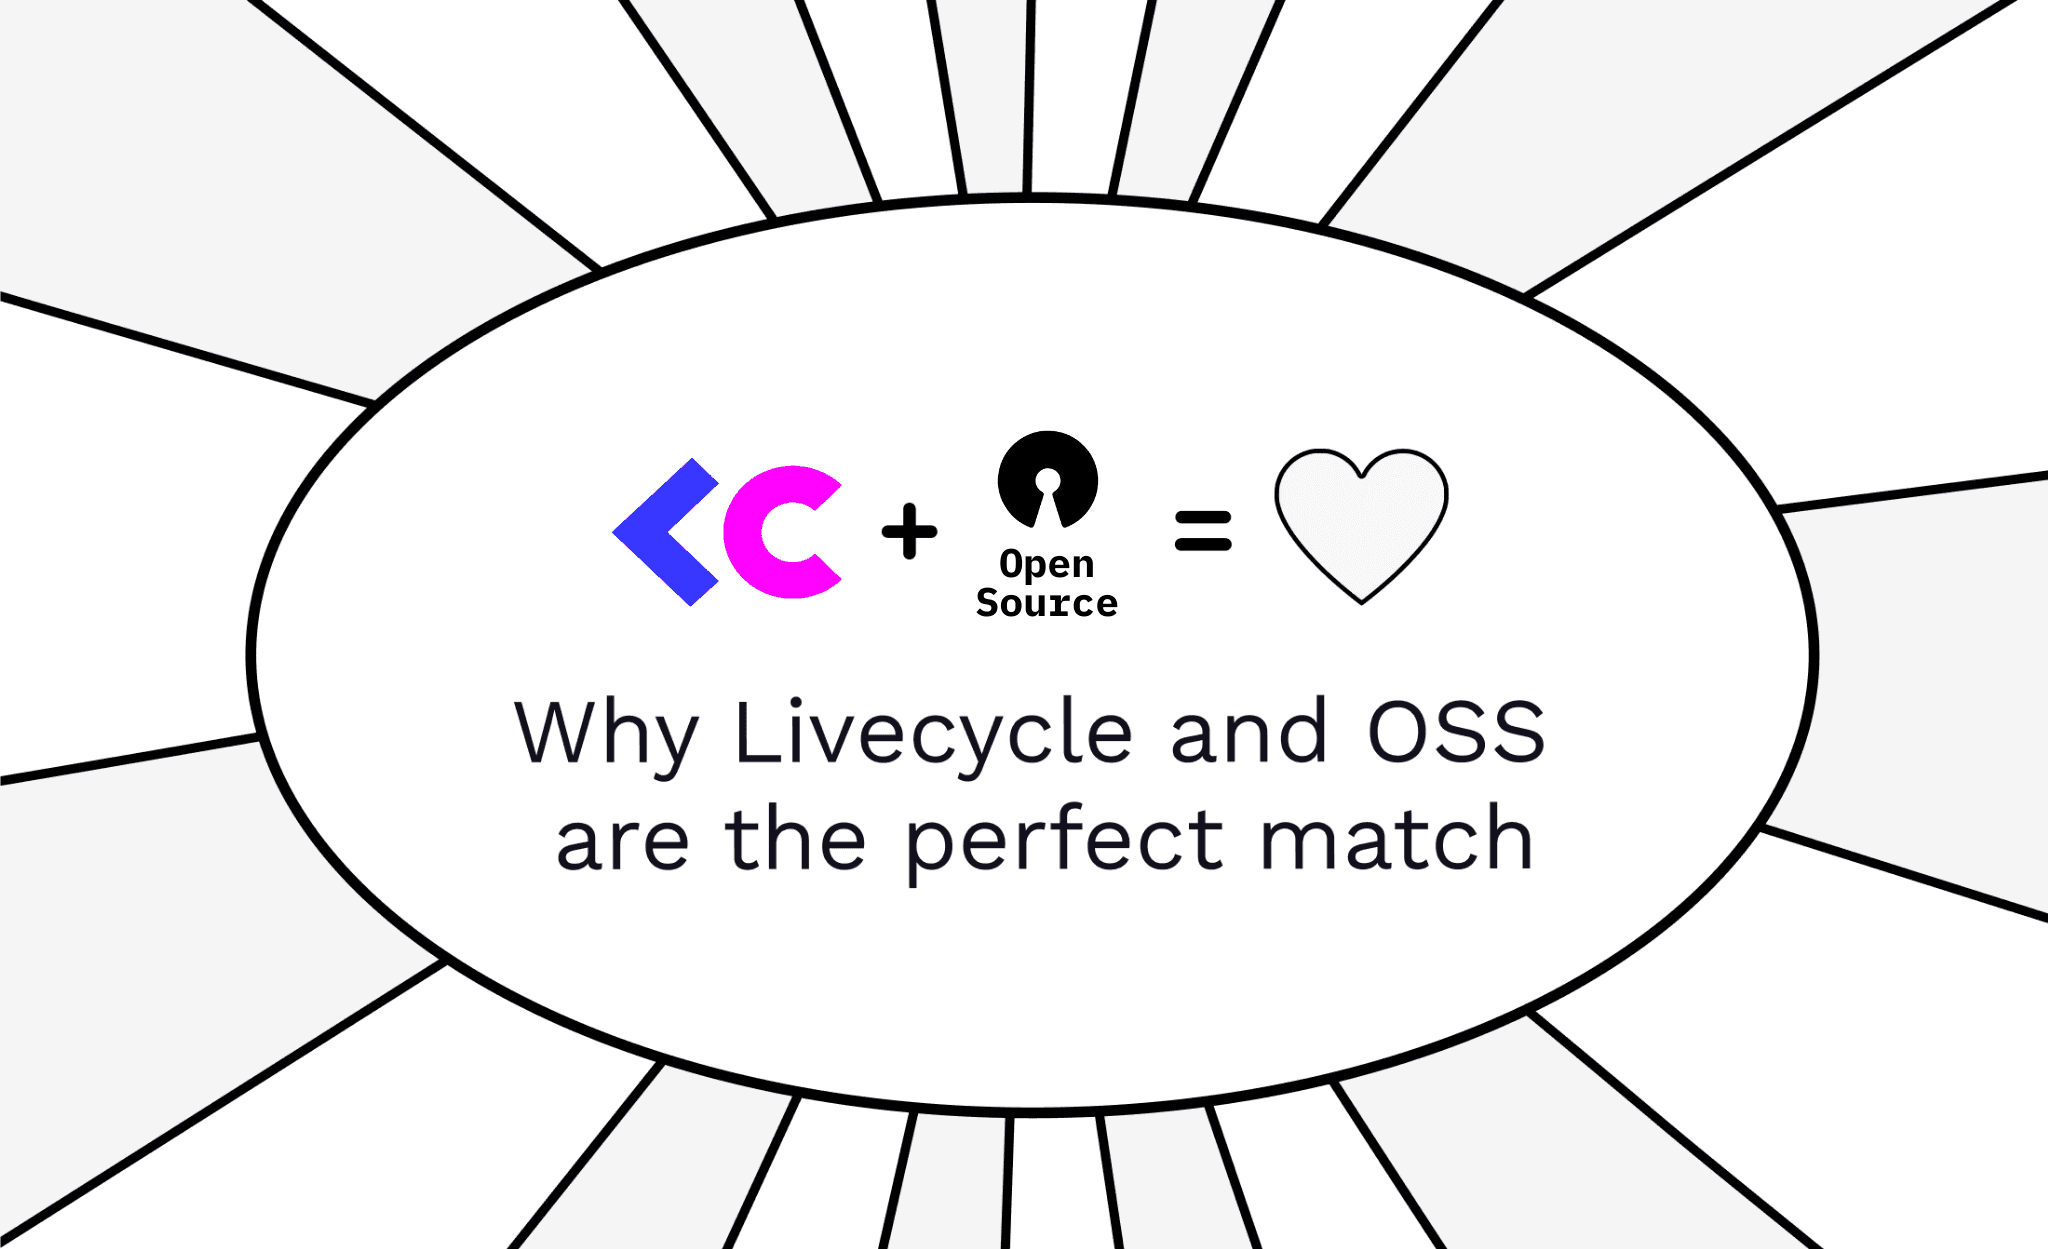 Livecycle & OSS - The Perfect Match